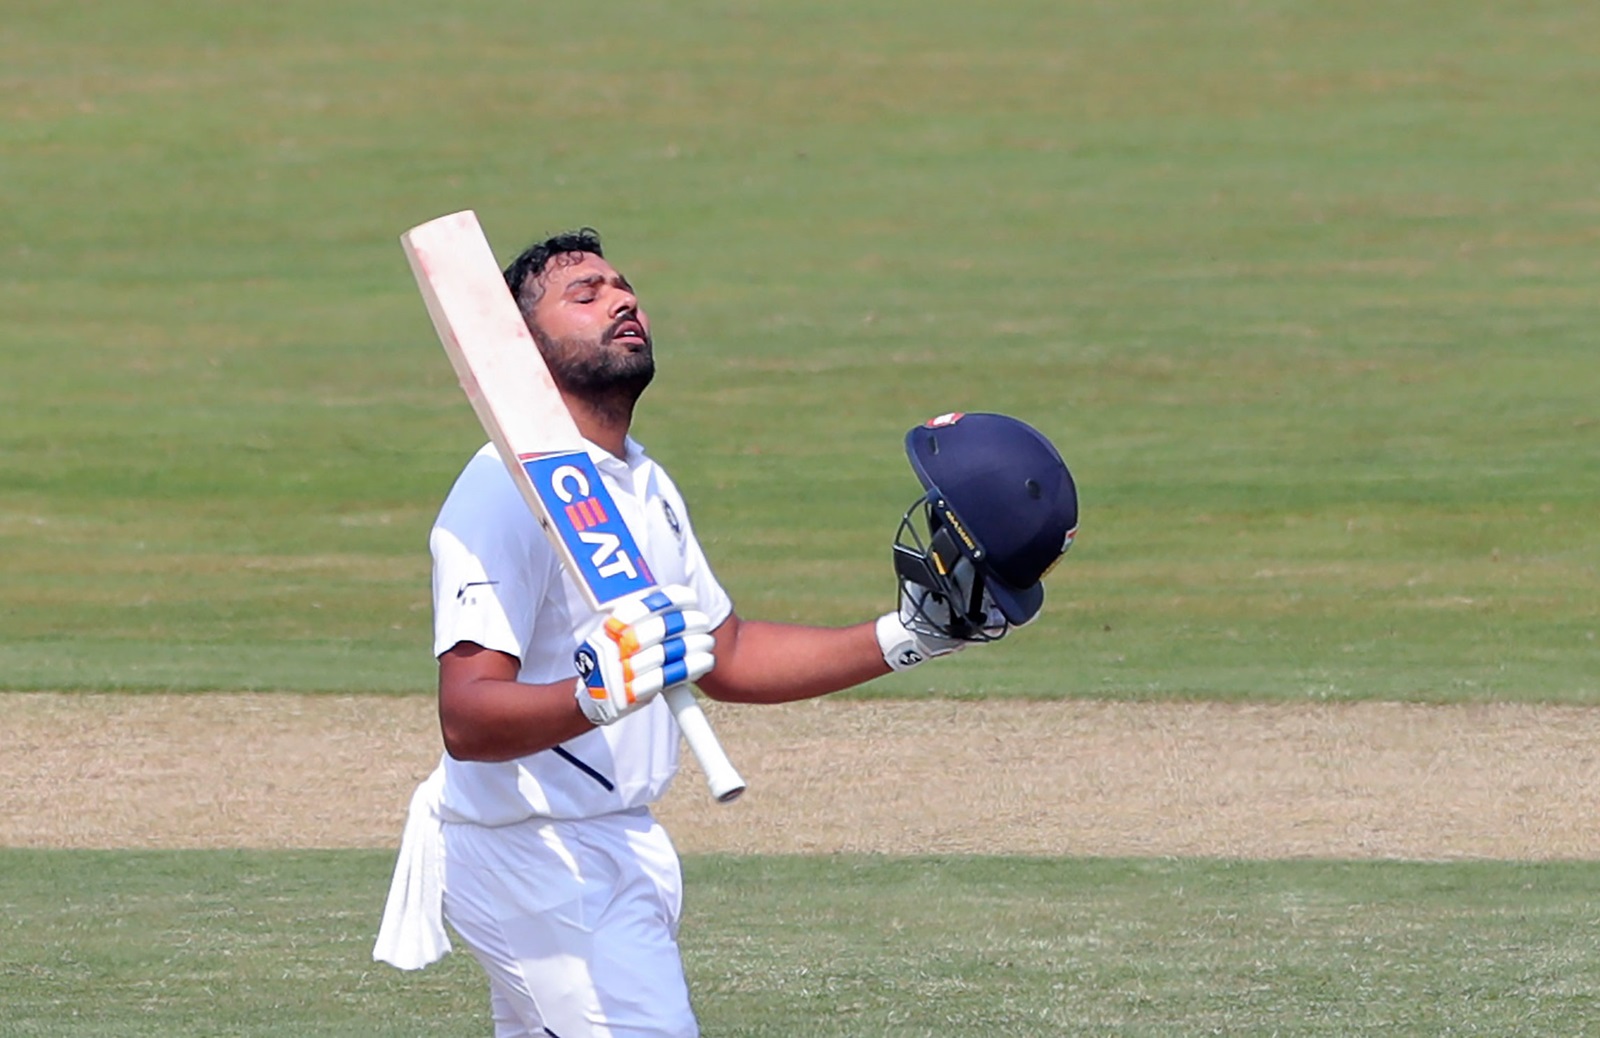 Rohit is the first-ever batsman to score two centuries on debut as a Test opener | AFP